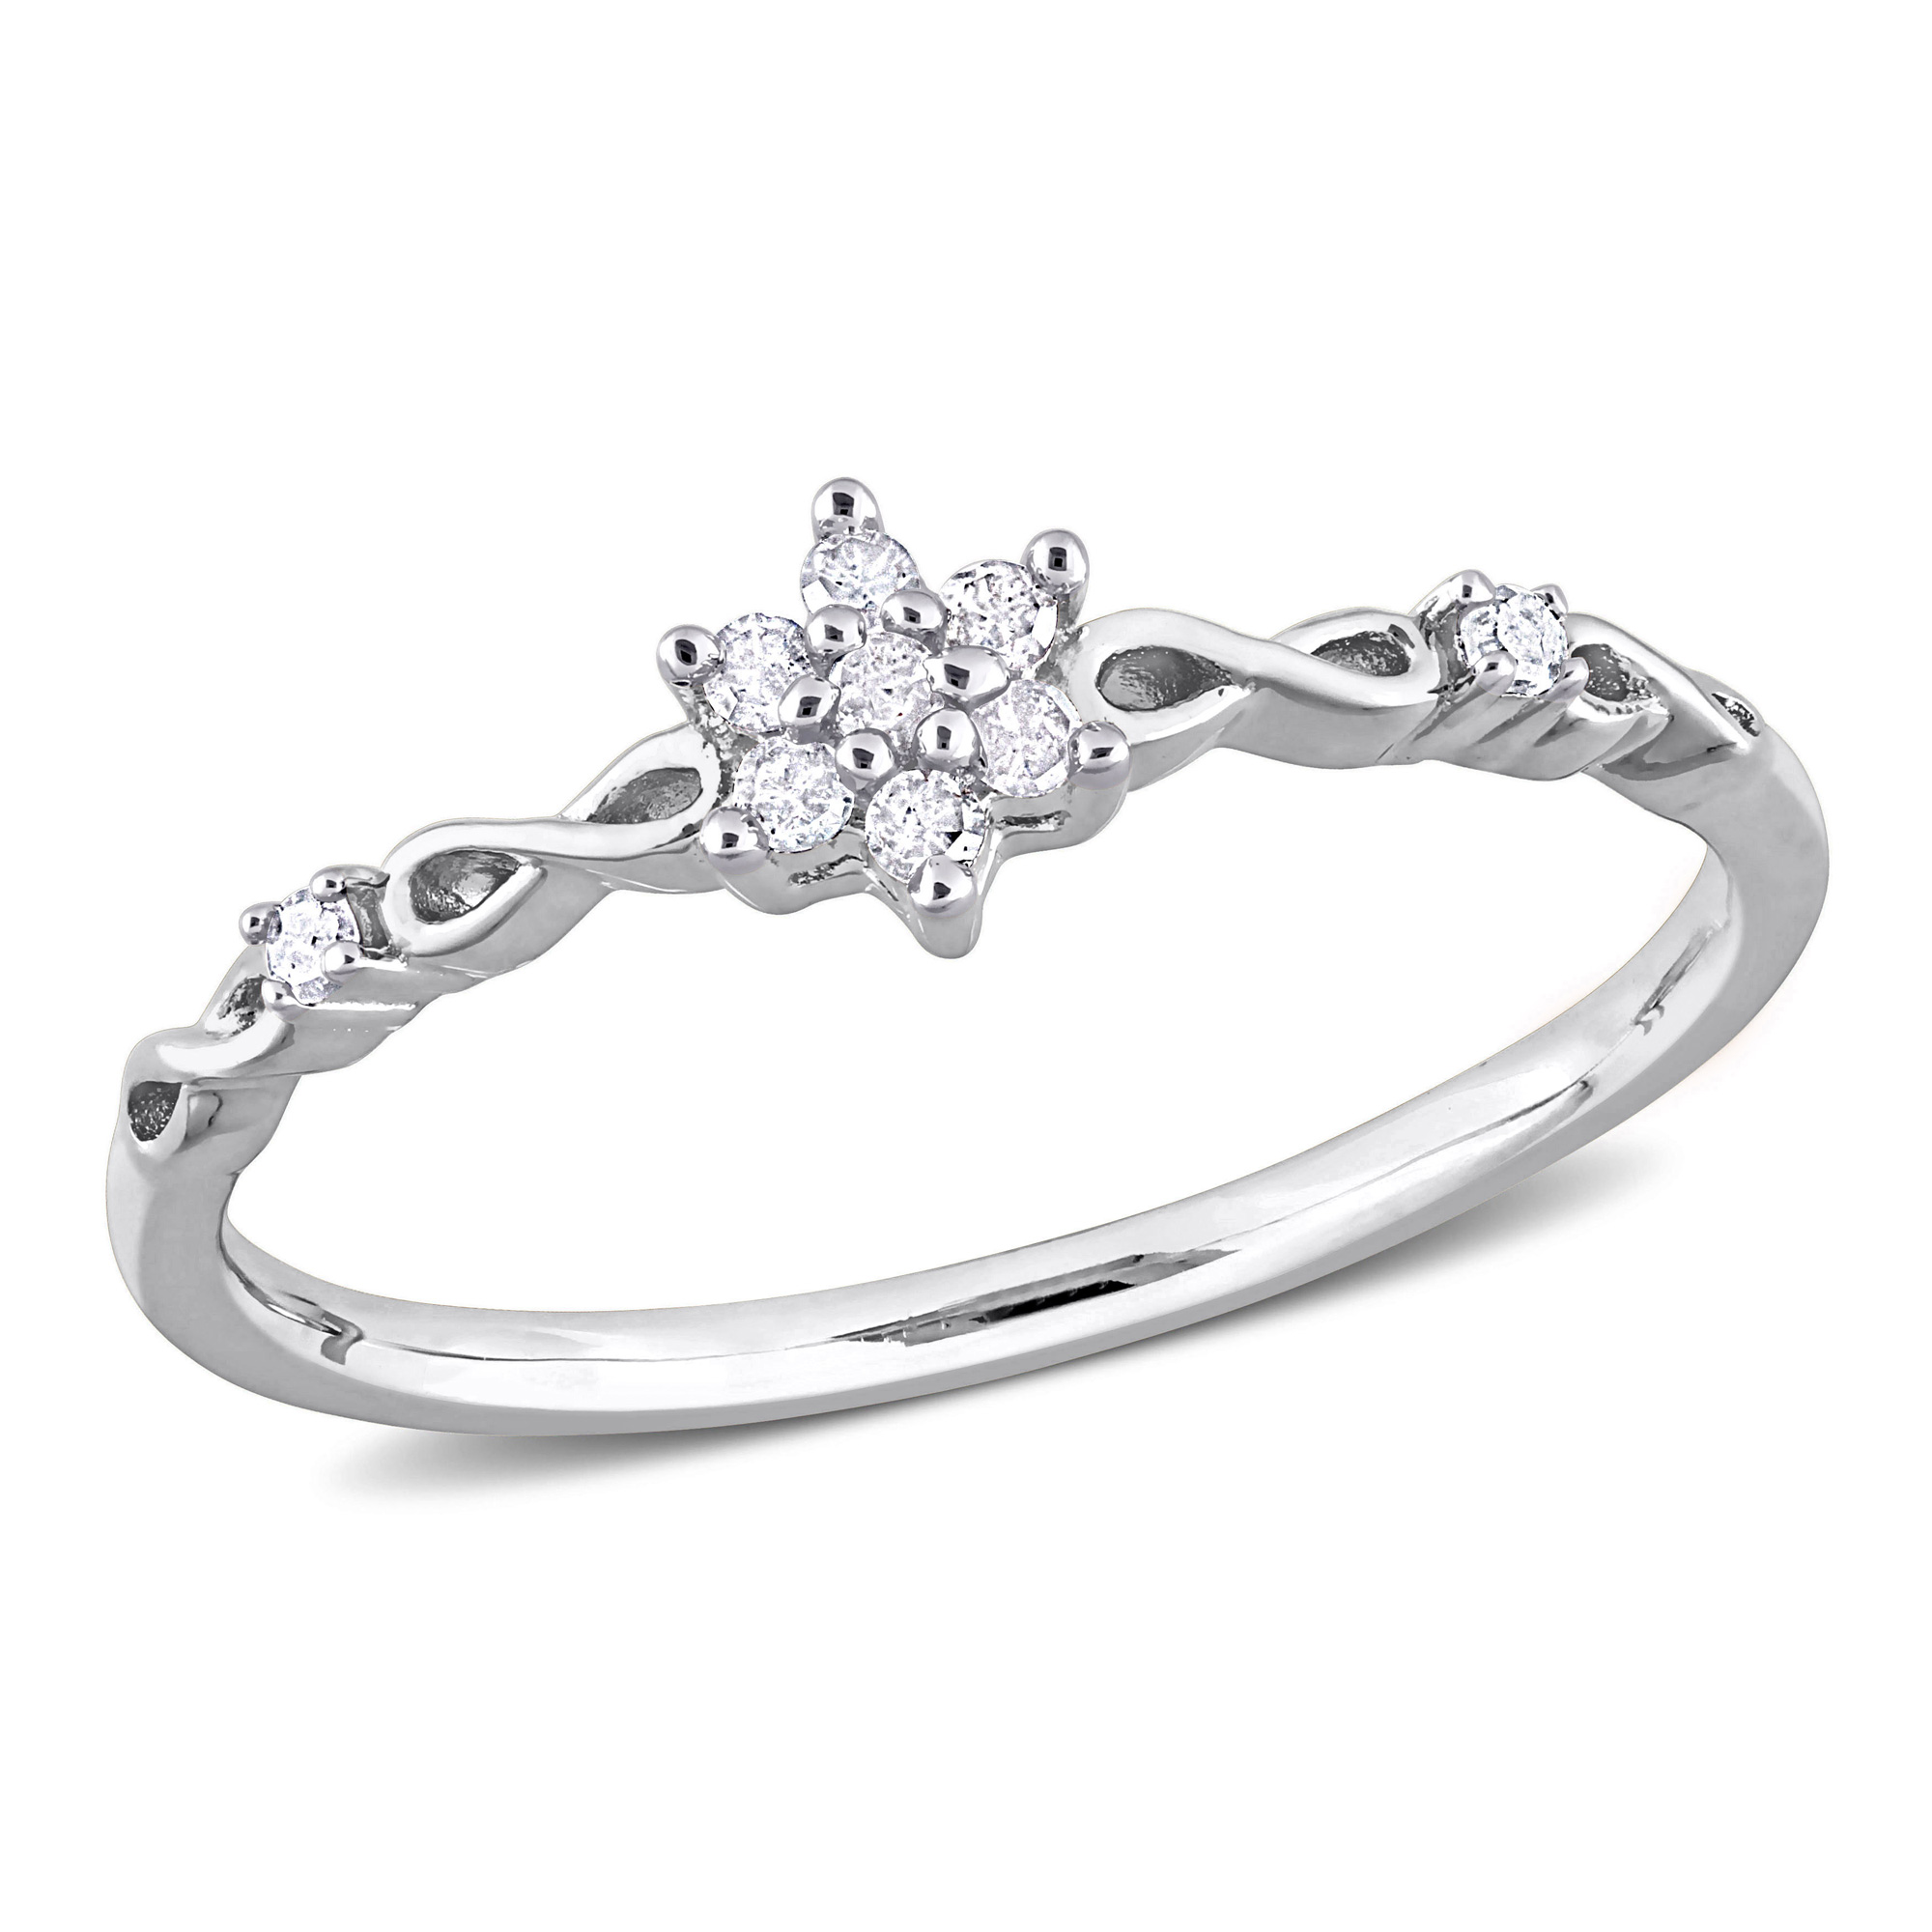 1/10ctw Diamond Floral Sterling Silver Infinity Promise Ring - Size 10 -  REEDS, RDJ004623-1000